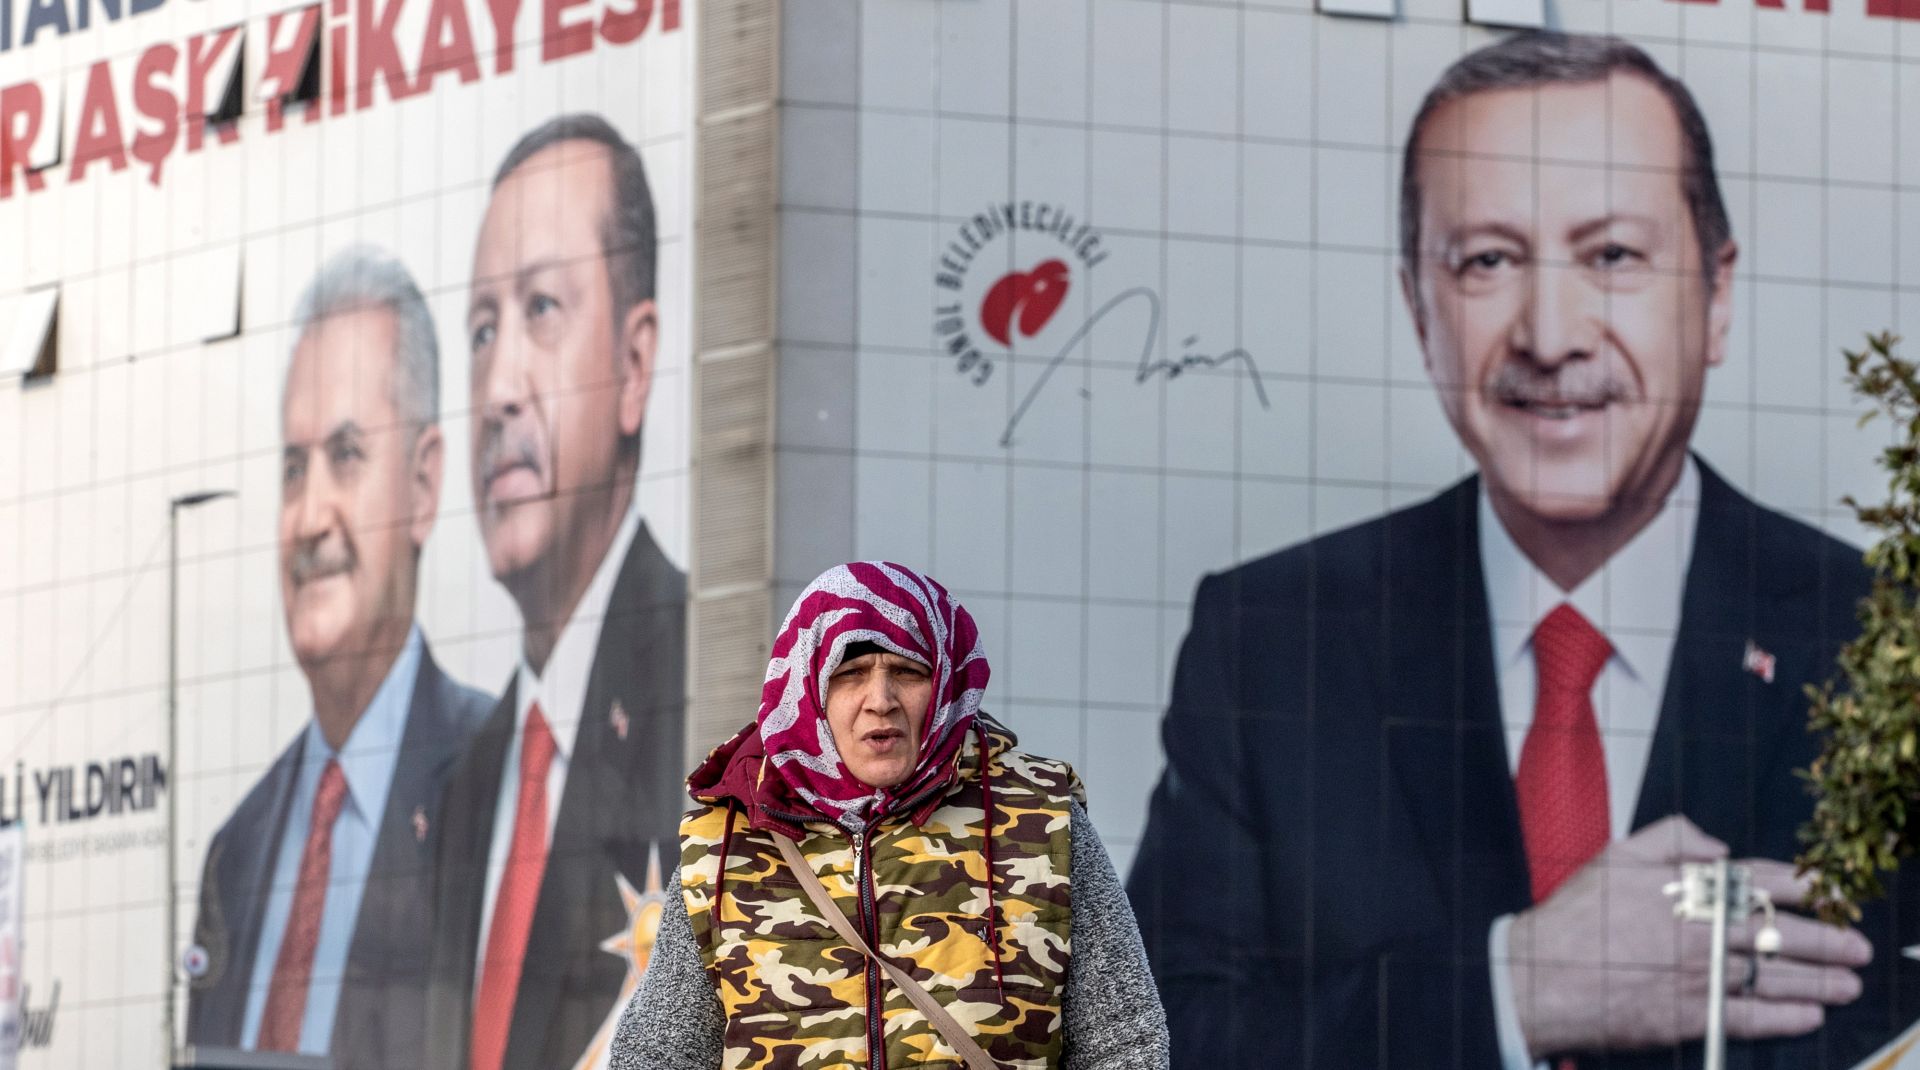 epa07467143 A woman walks in front of the pictures of Turkish President Recep Tayyip Erdogan (R) and Candidate of Justice and Development Party (AK Party) for Istanbul mayor Binali Yildirim (L), in Istanbul, Turkey, 27 March 2019. Local elections in Turkey's capital and the country's overall 81 provinces are scheduled for 31 March 2019.  EPA/SEDAT SUNA